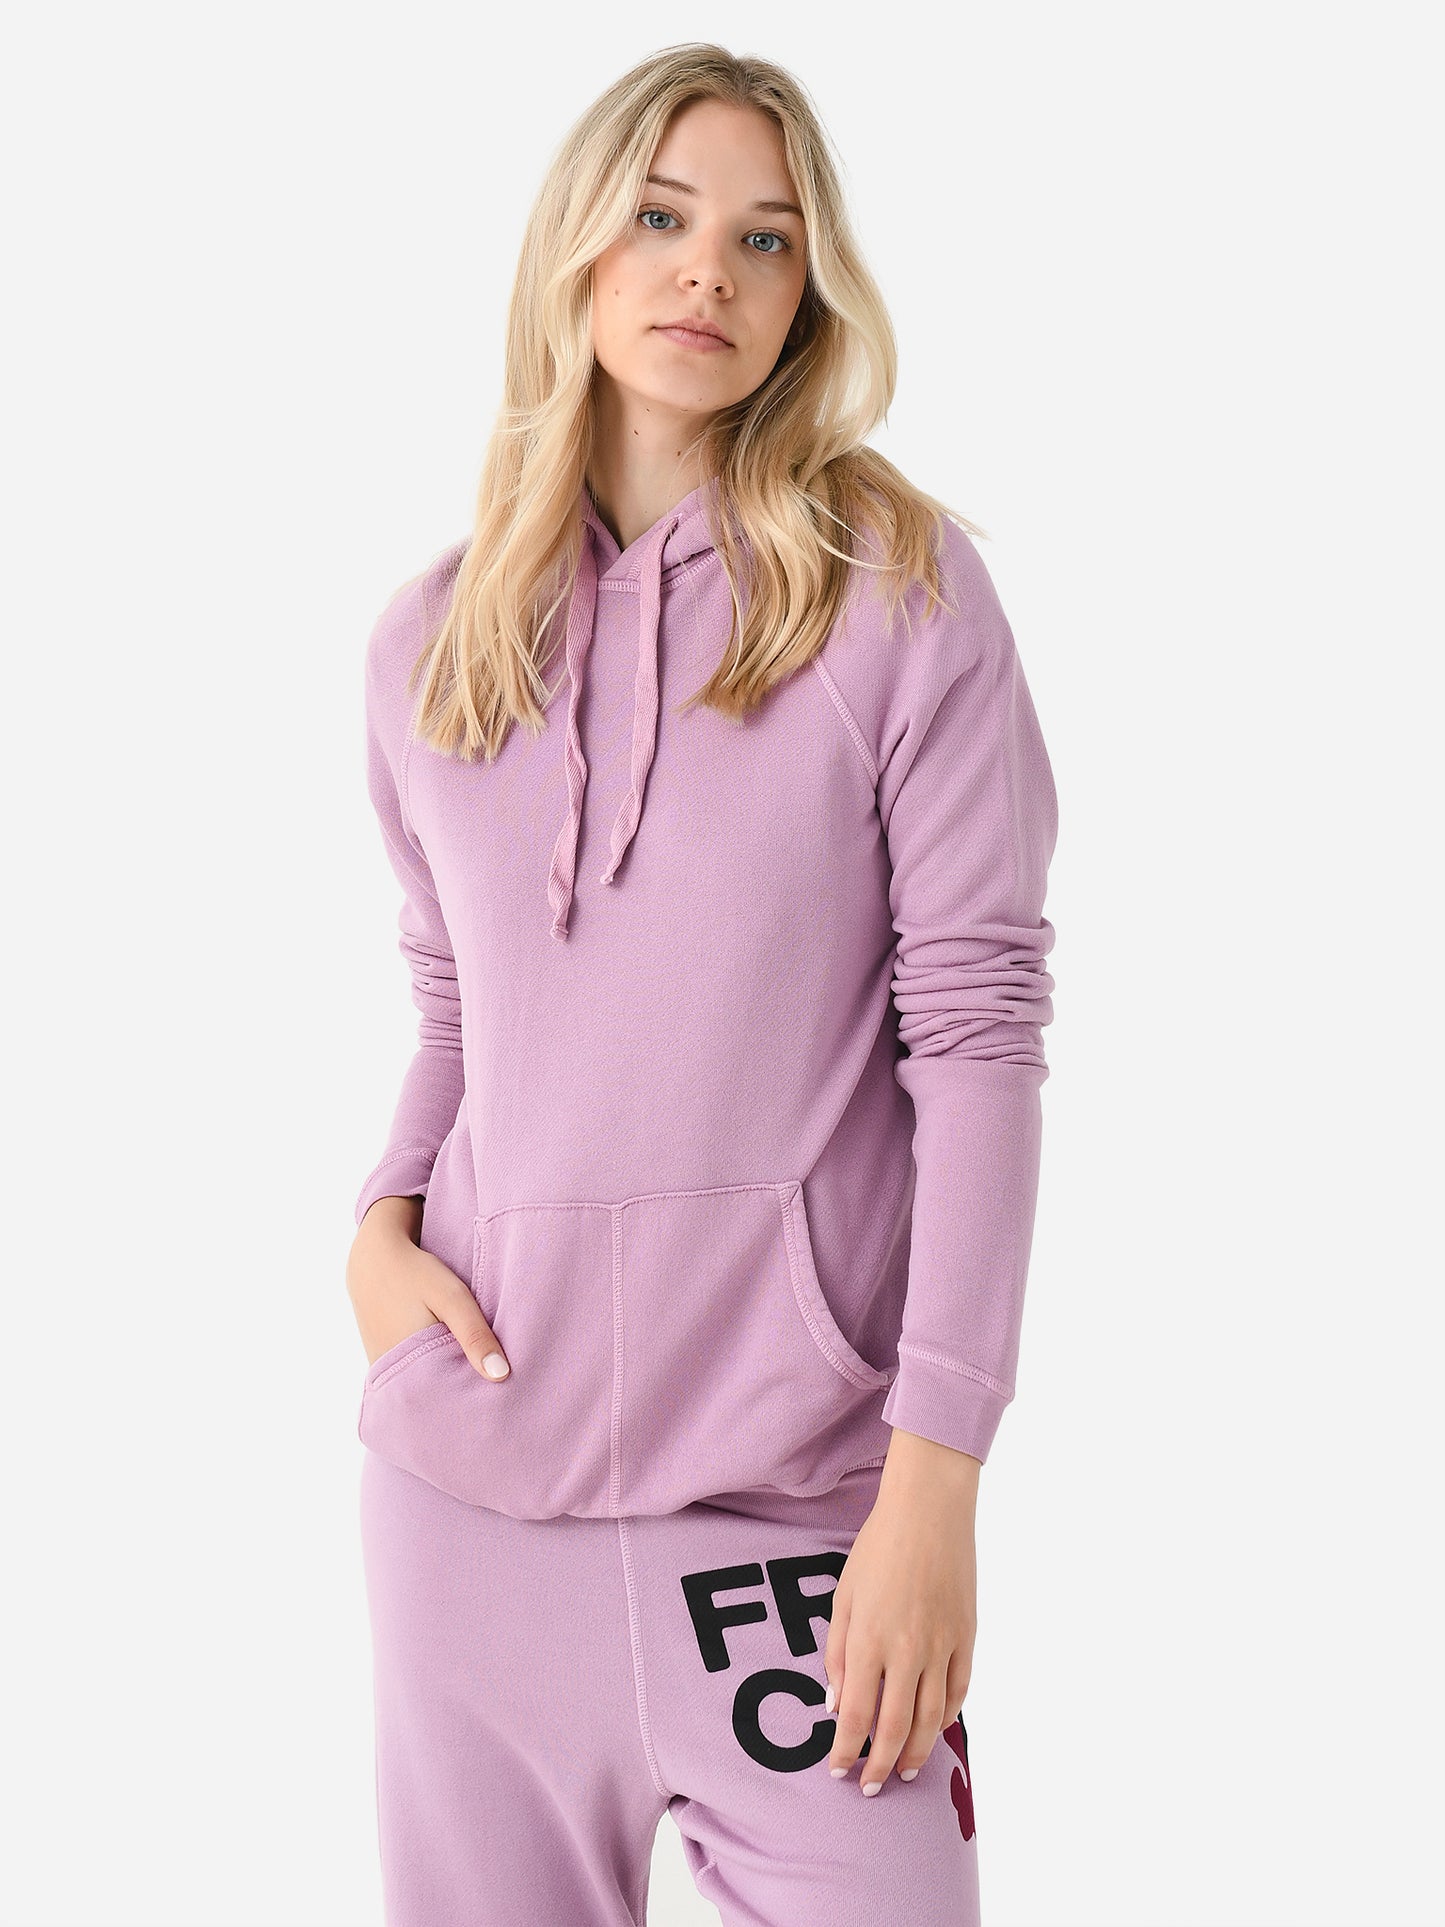 FREE CITY Women's Superfluff Lux Pullover Hoodie